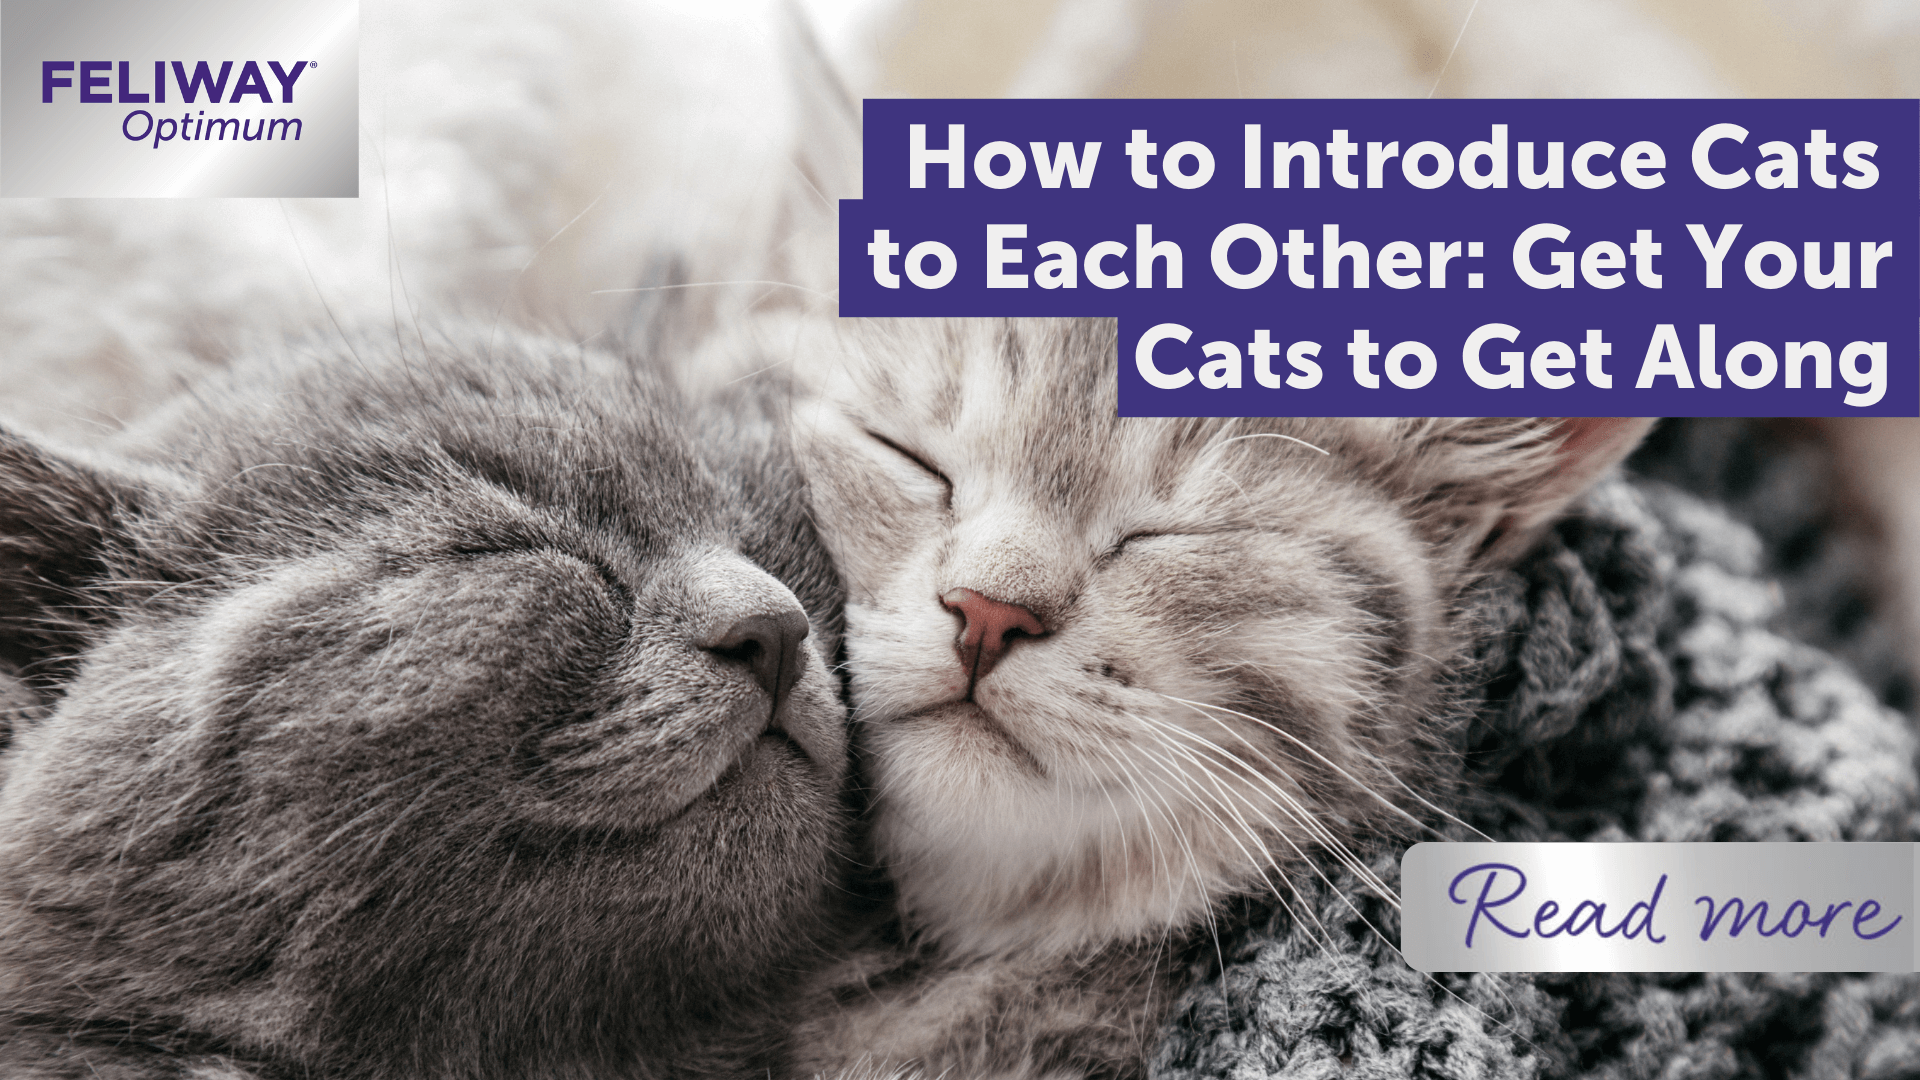 How to Introduce Cats To Each Other: Get Your Cats to Get Along